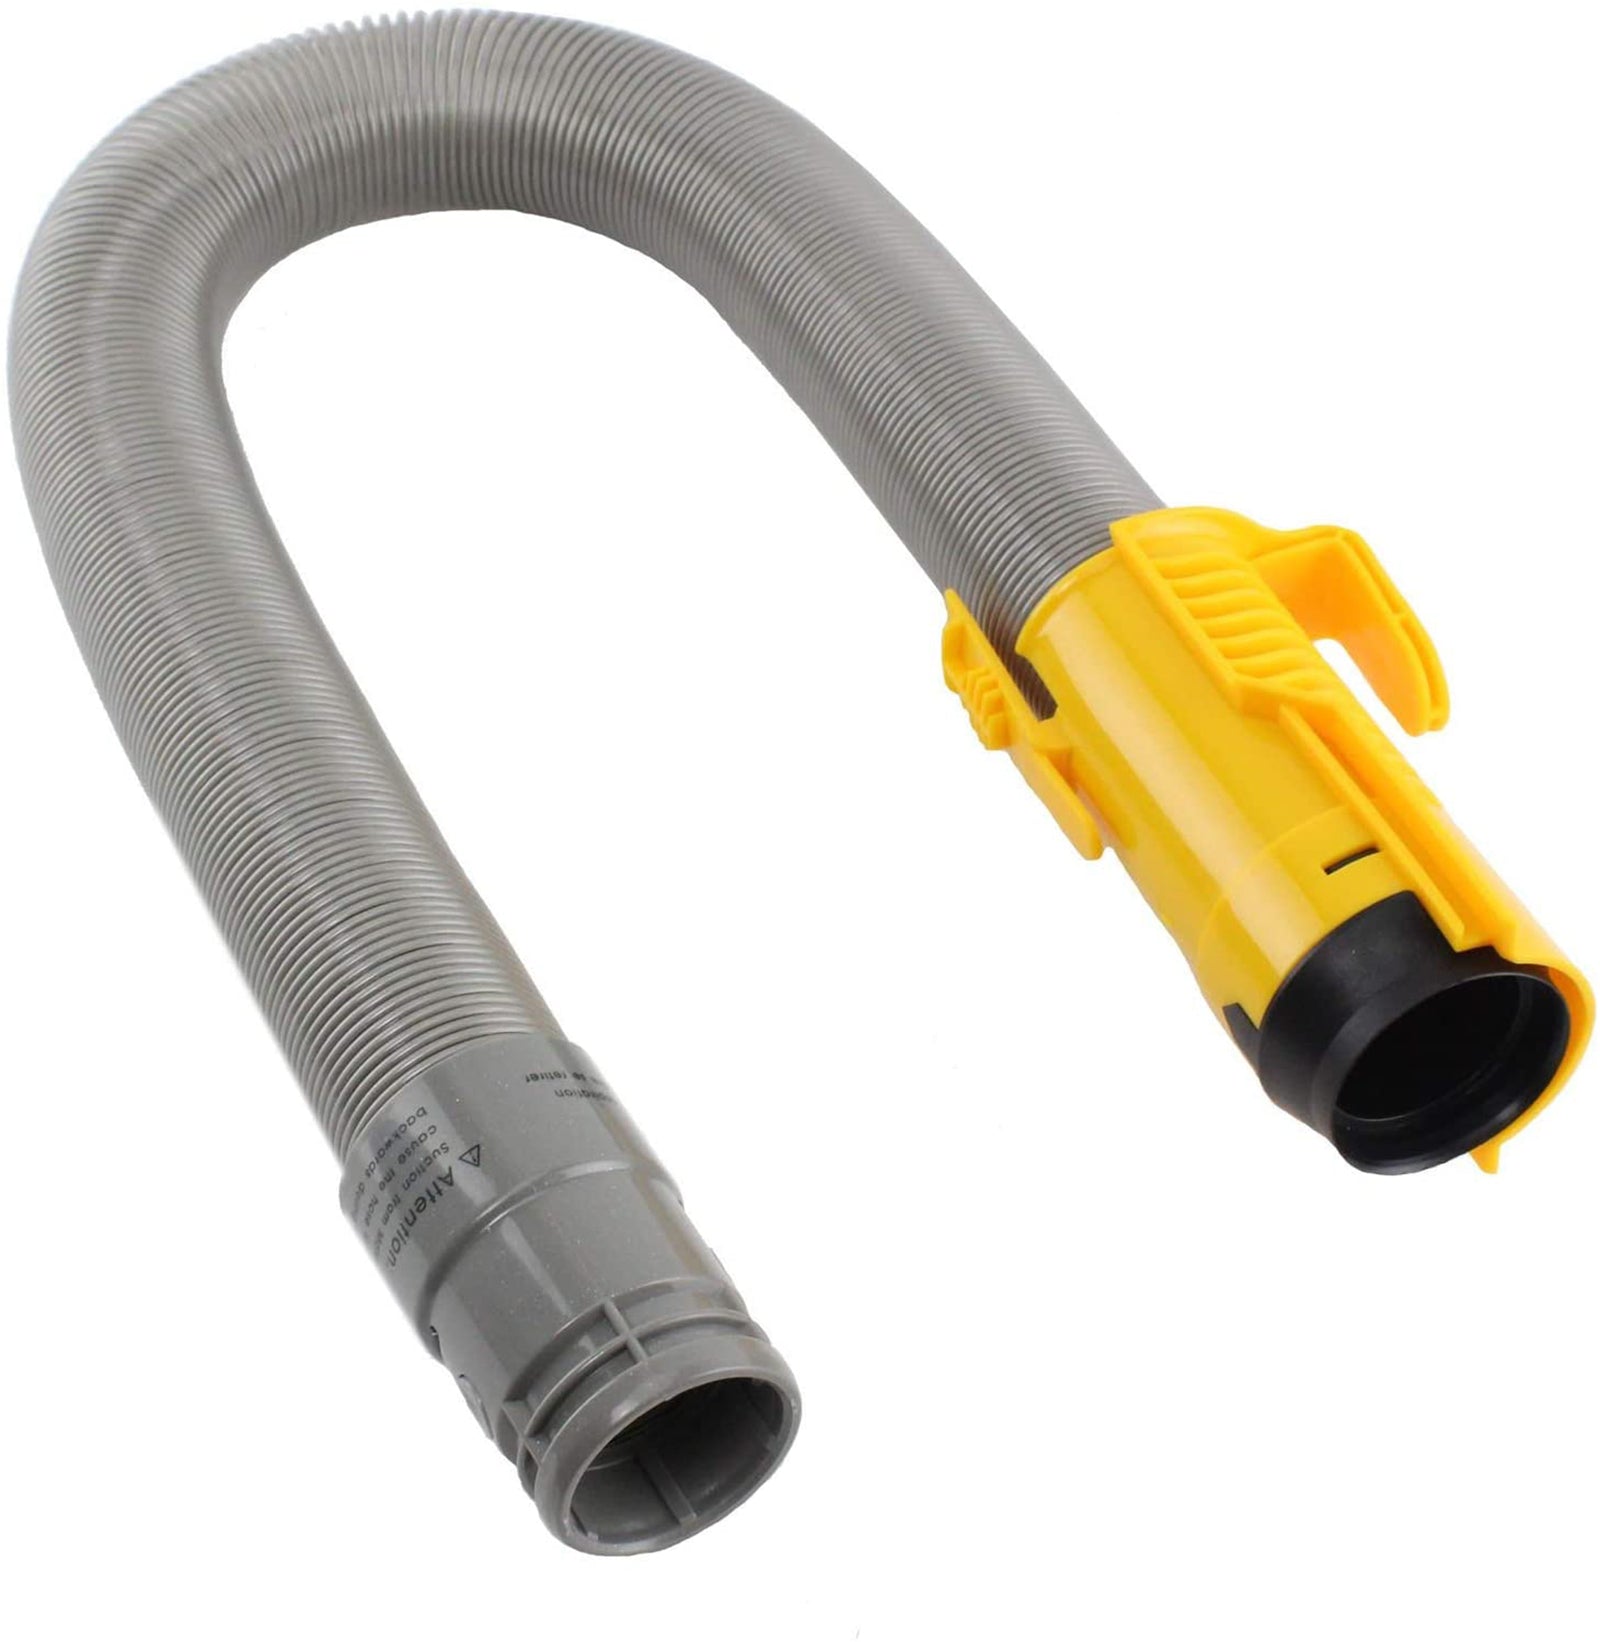 Stretch Hose for DYSON Vacuum Cleaner DC07 Quick Release (Grey / Yellow, 4m)